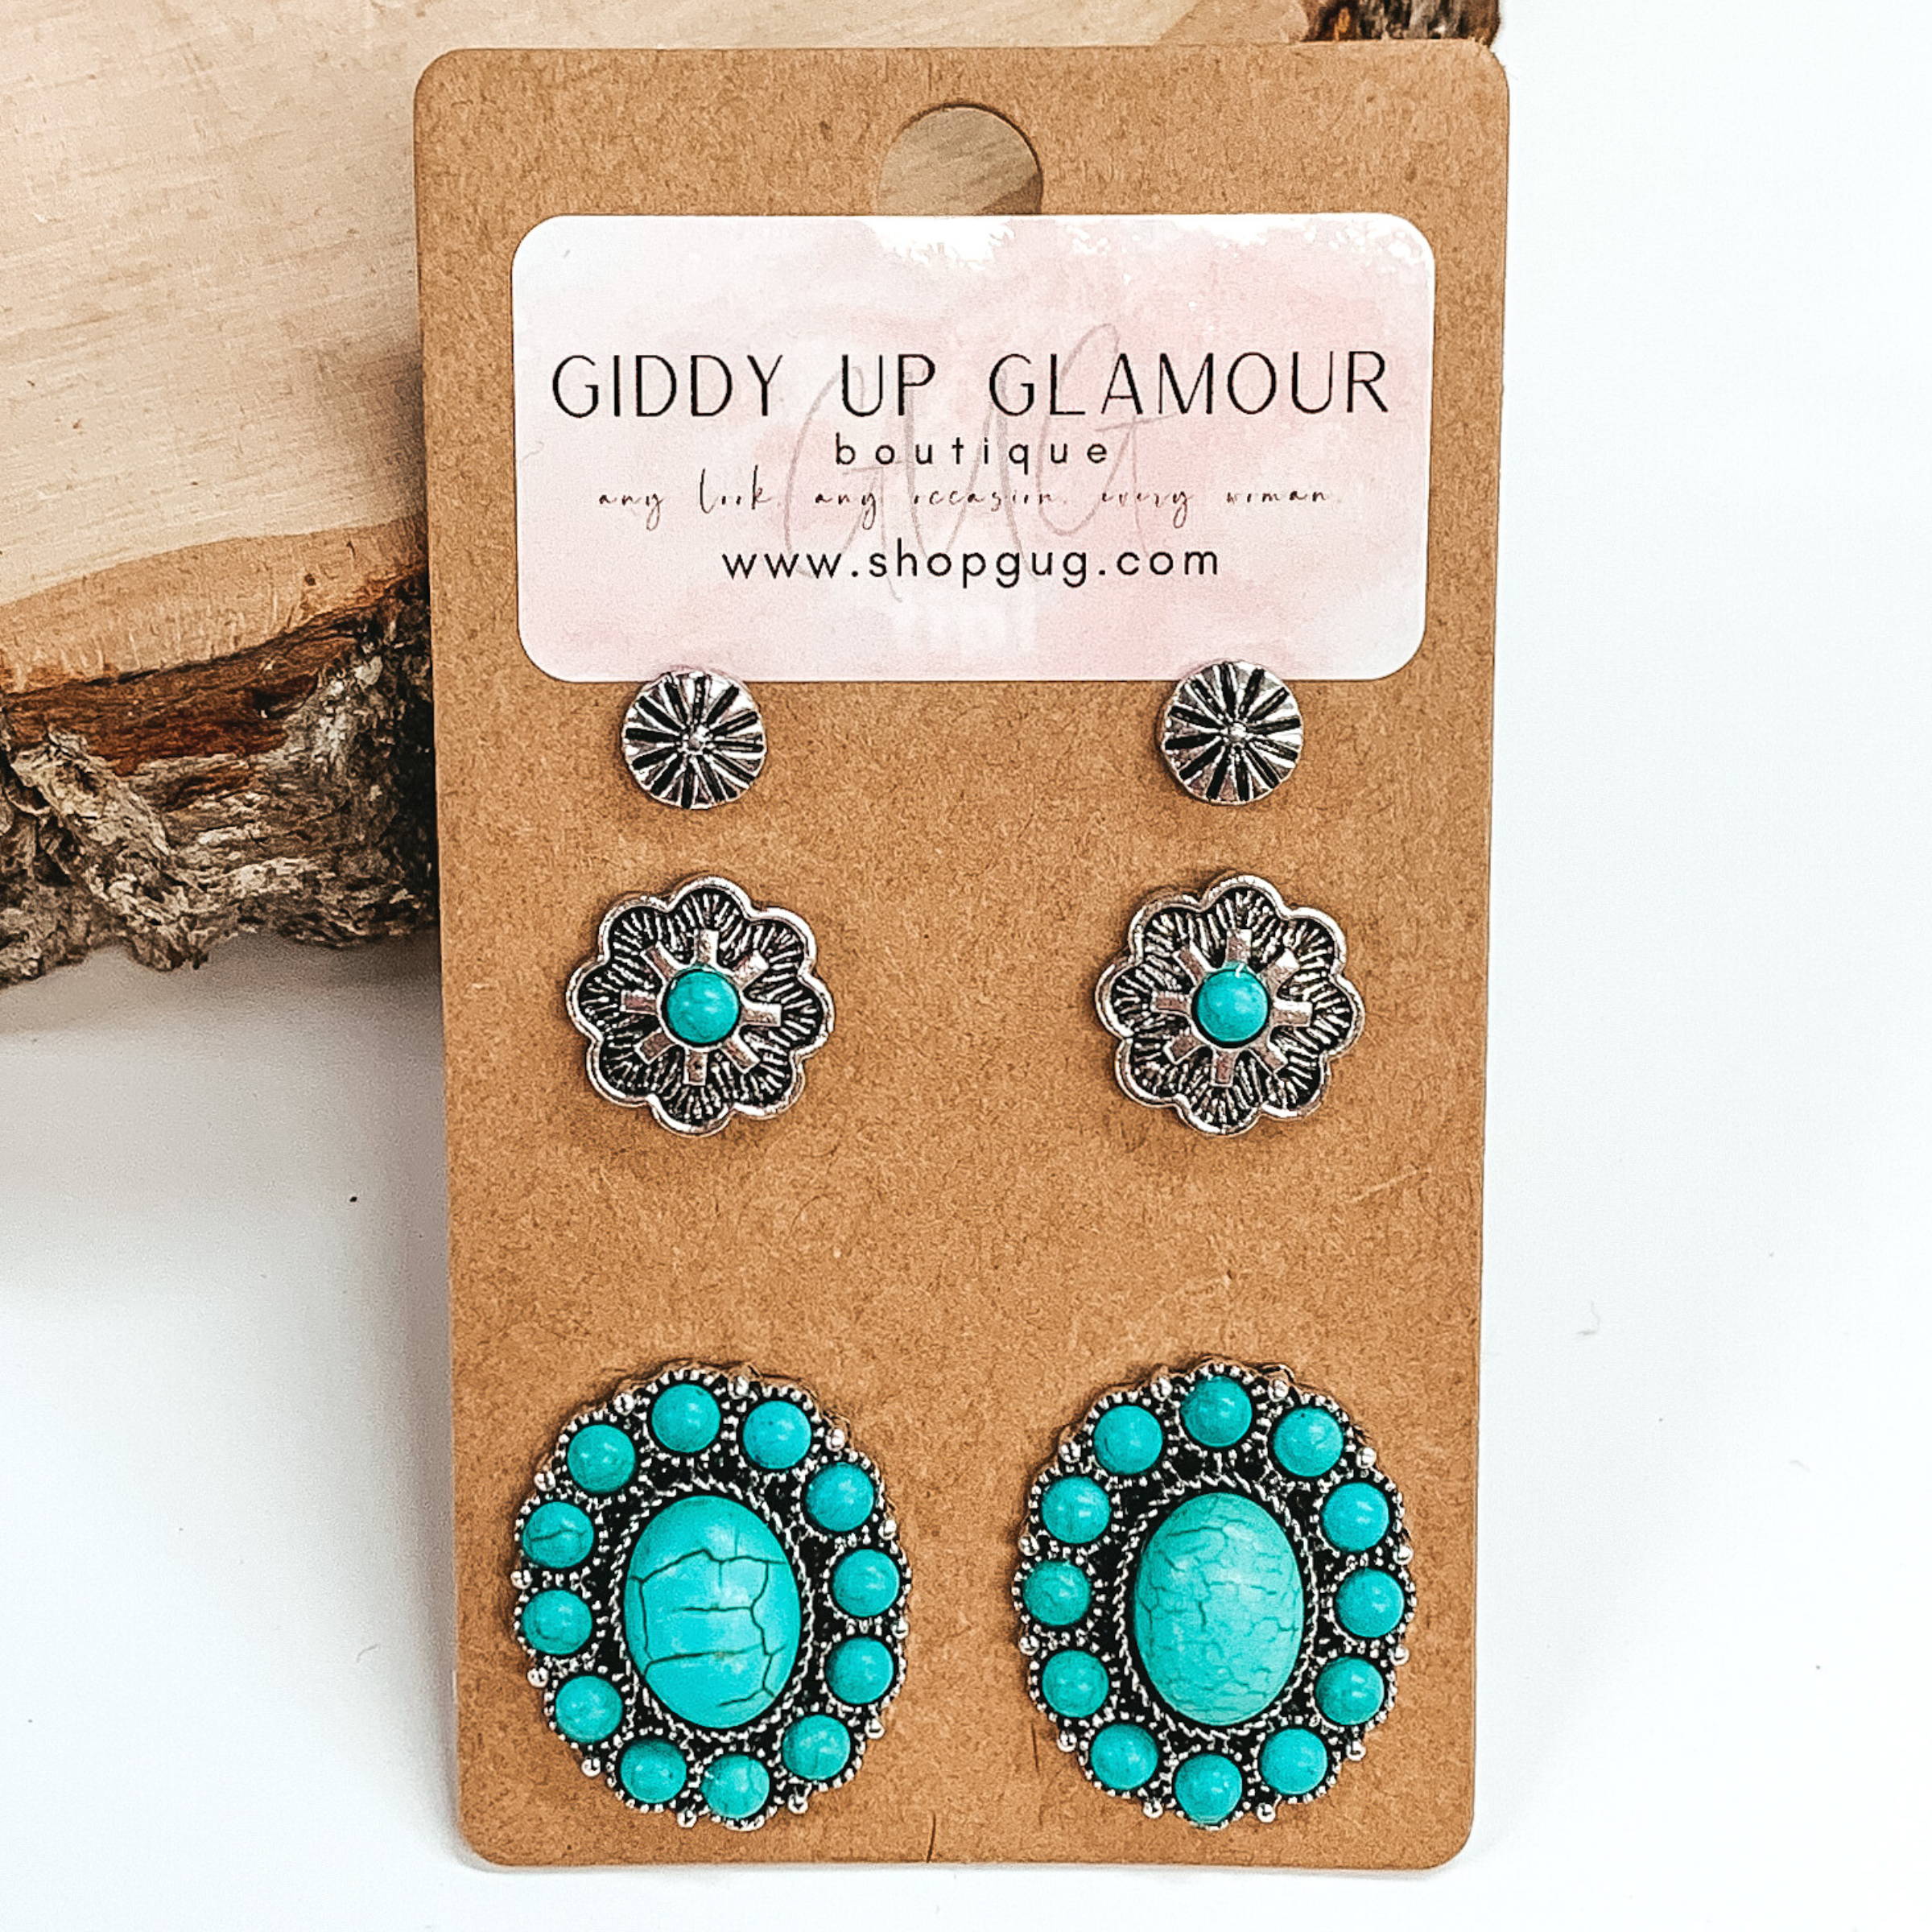 Western Concho Stone Earring Set in Turquoise - Giddy Up Glamour Boutique